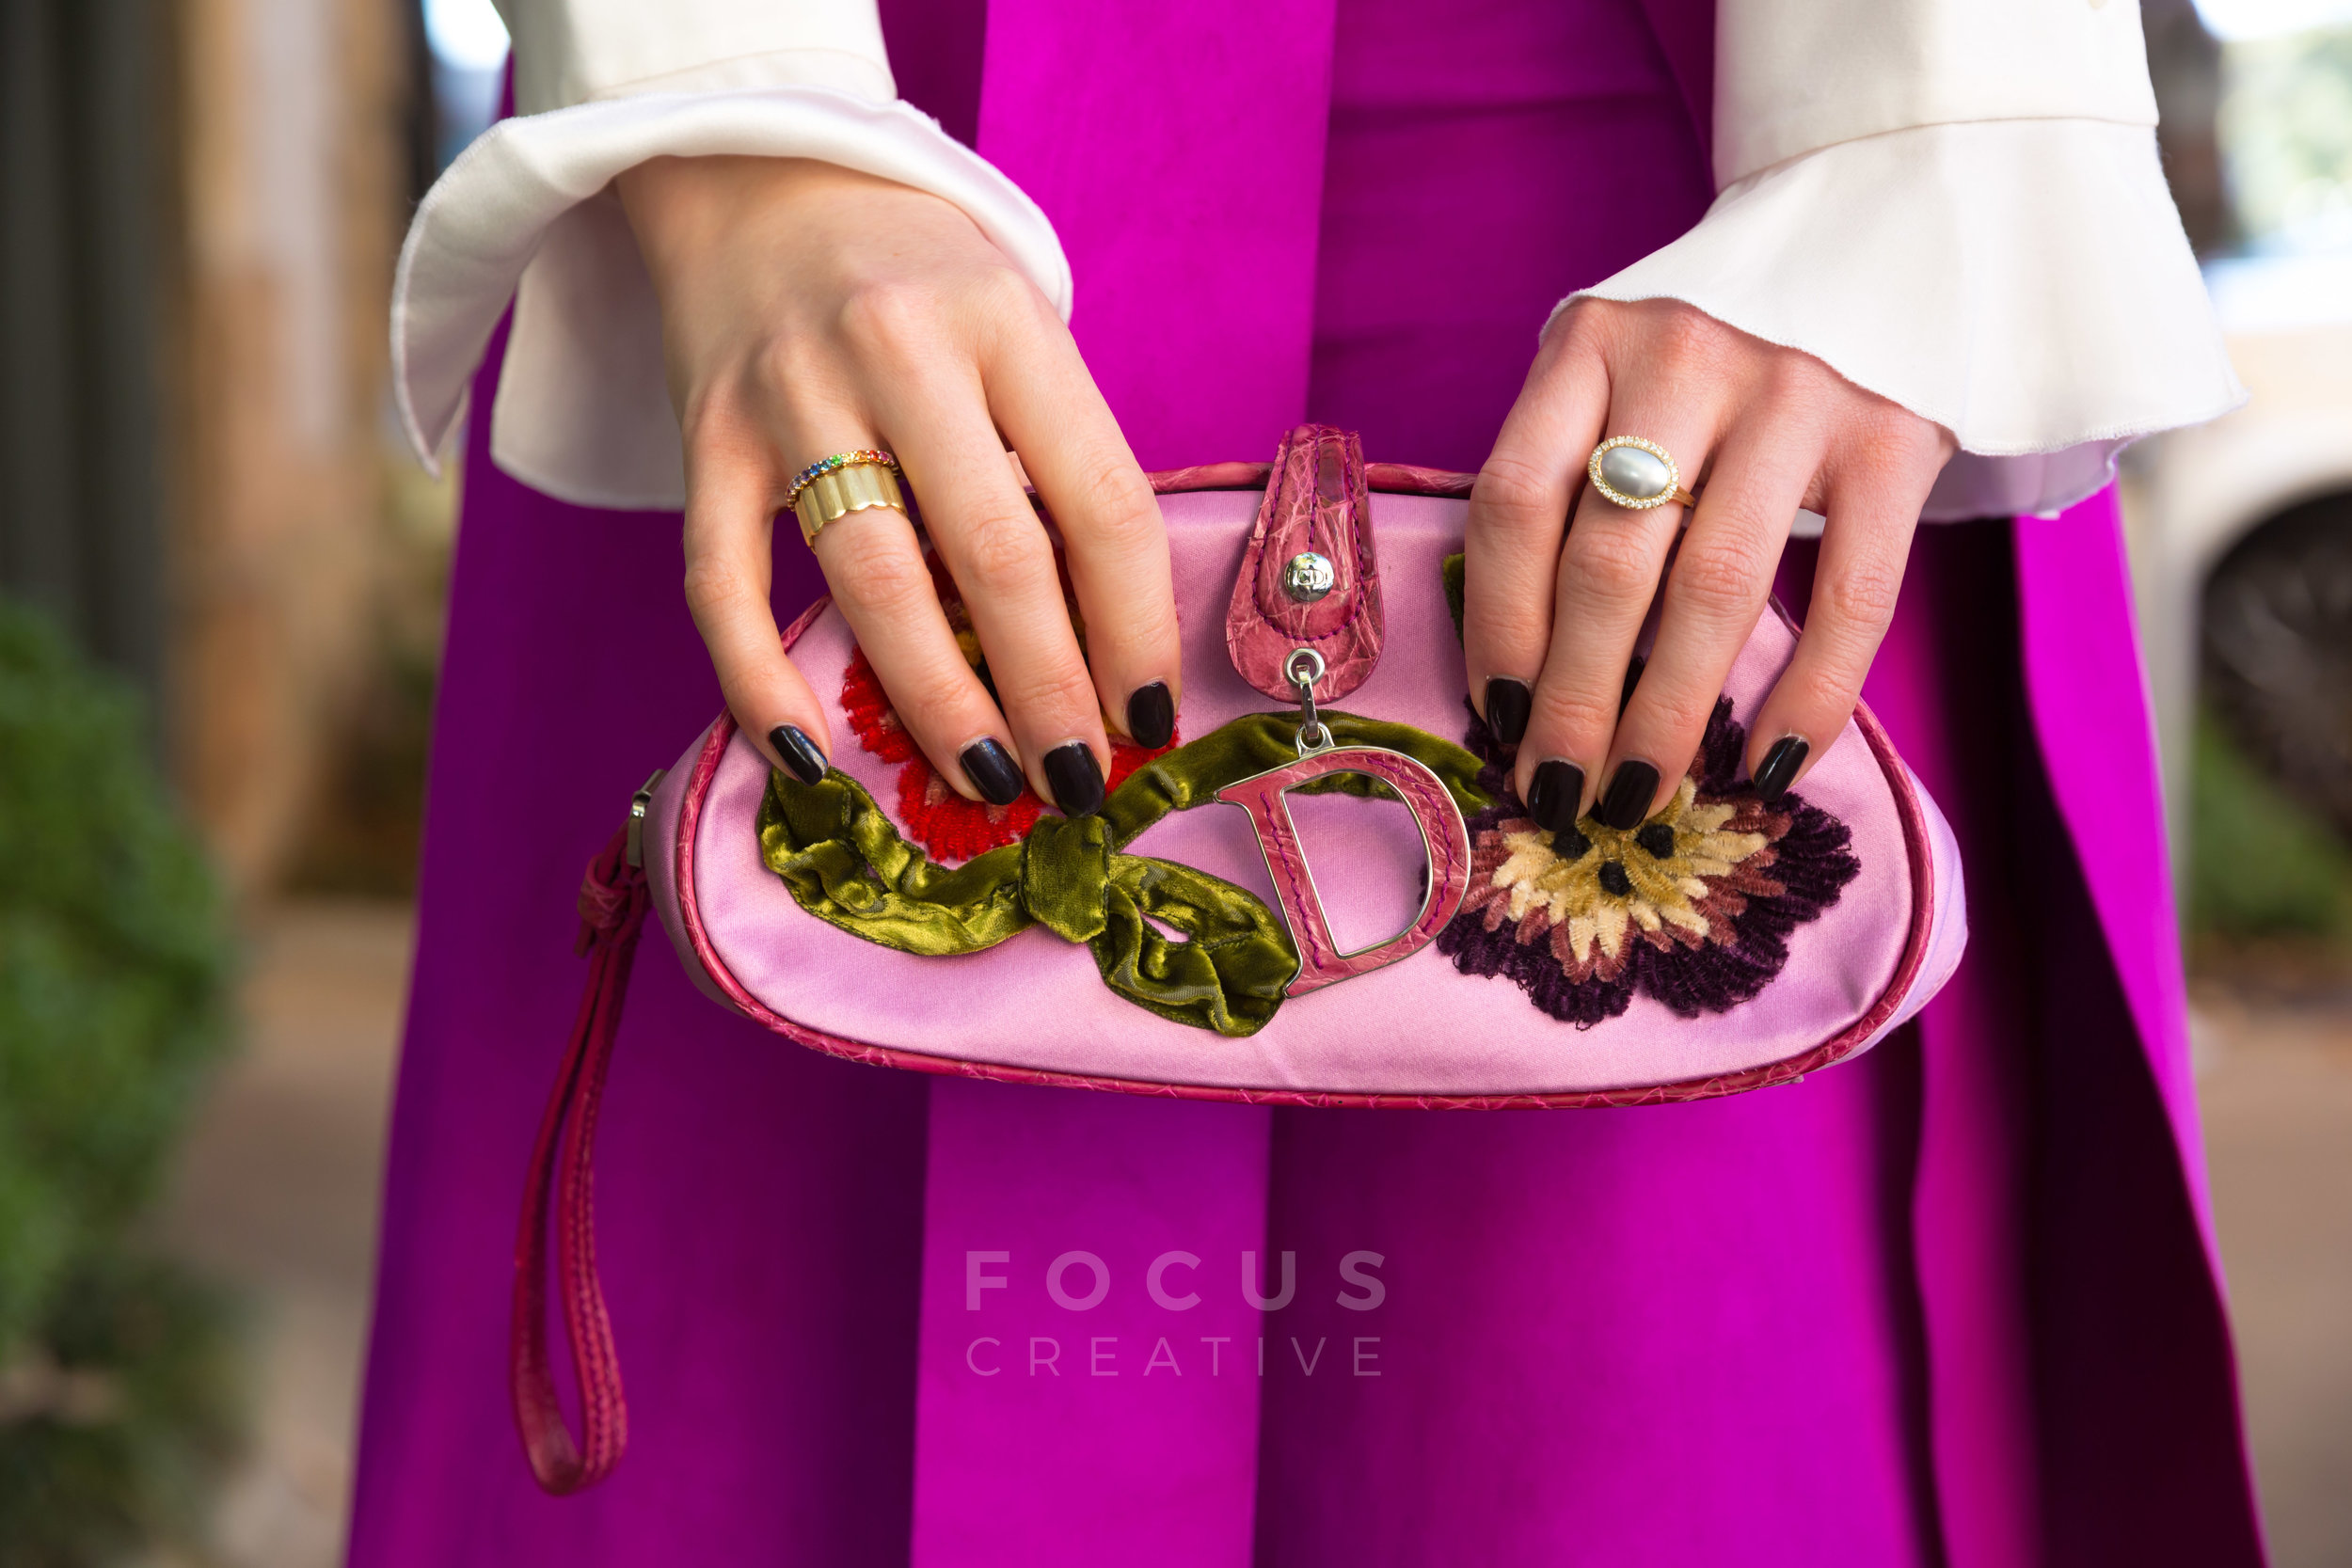 Delia Folk is featuring this Dior handbag and jewelry from Charlotte Allison Jewelry.